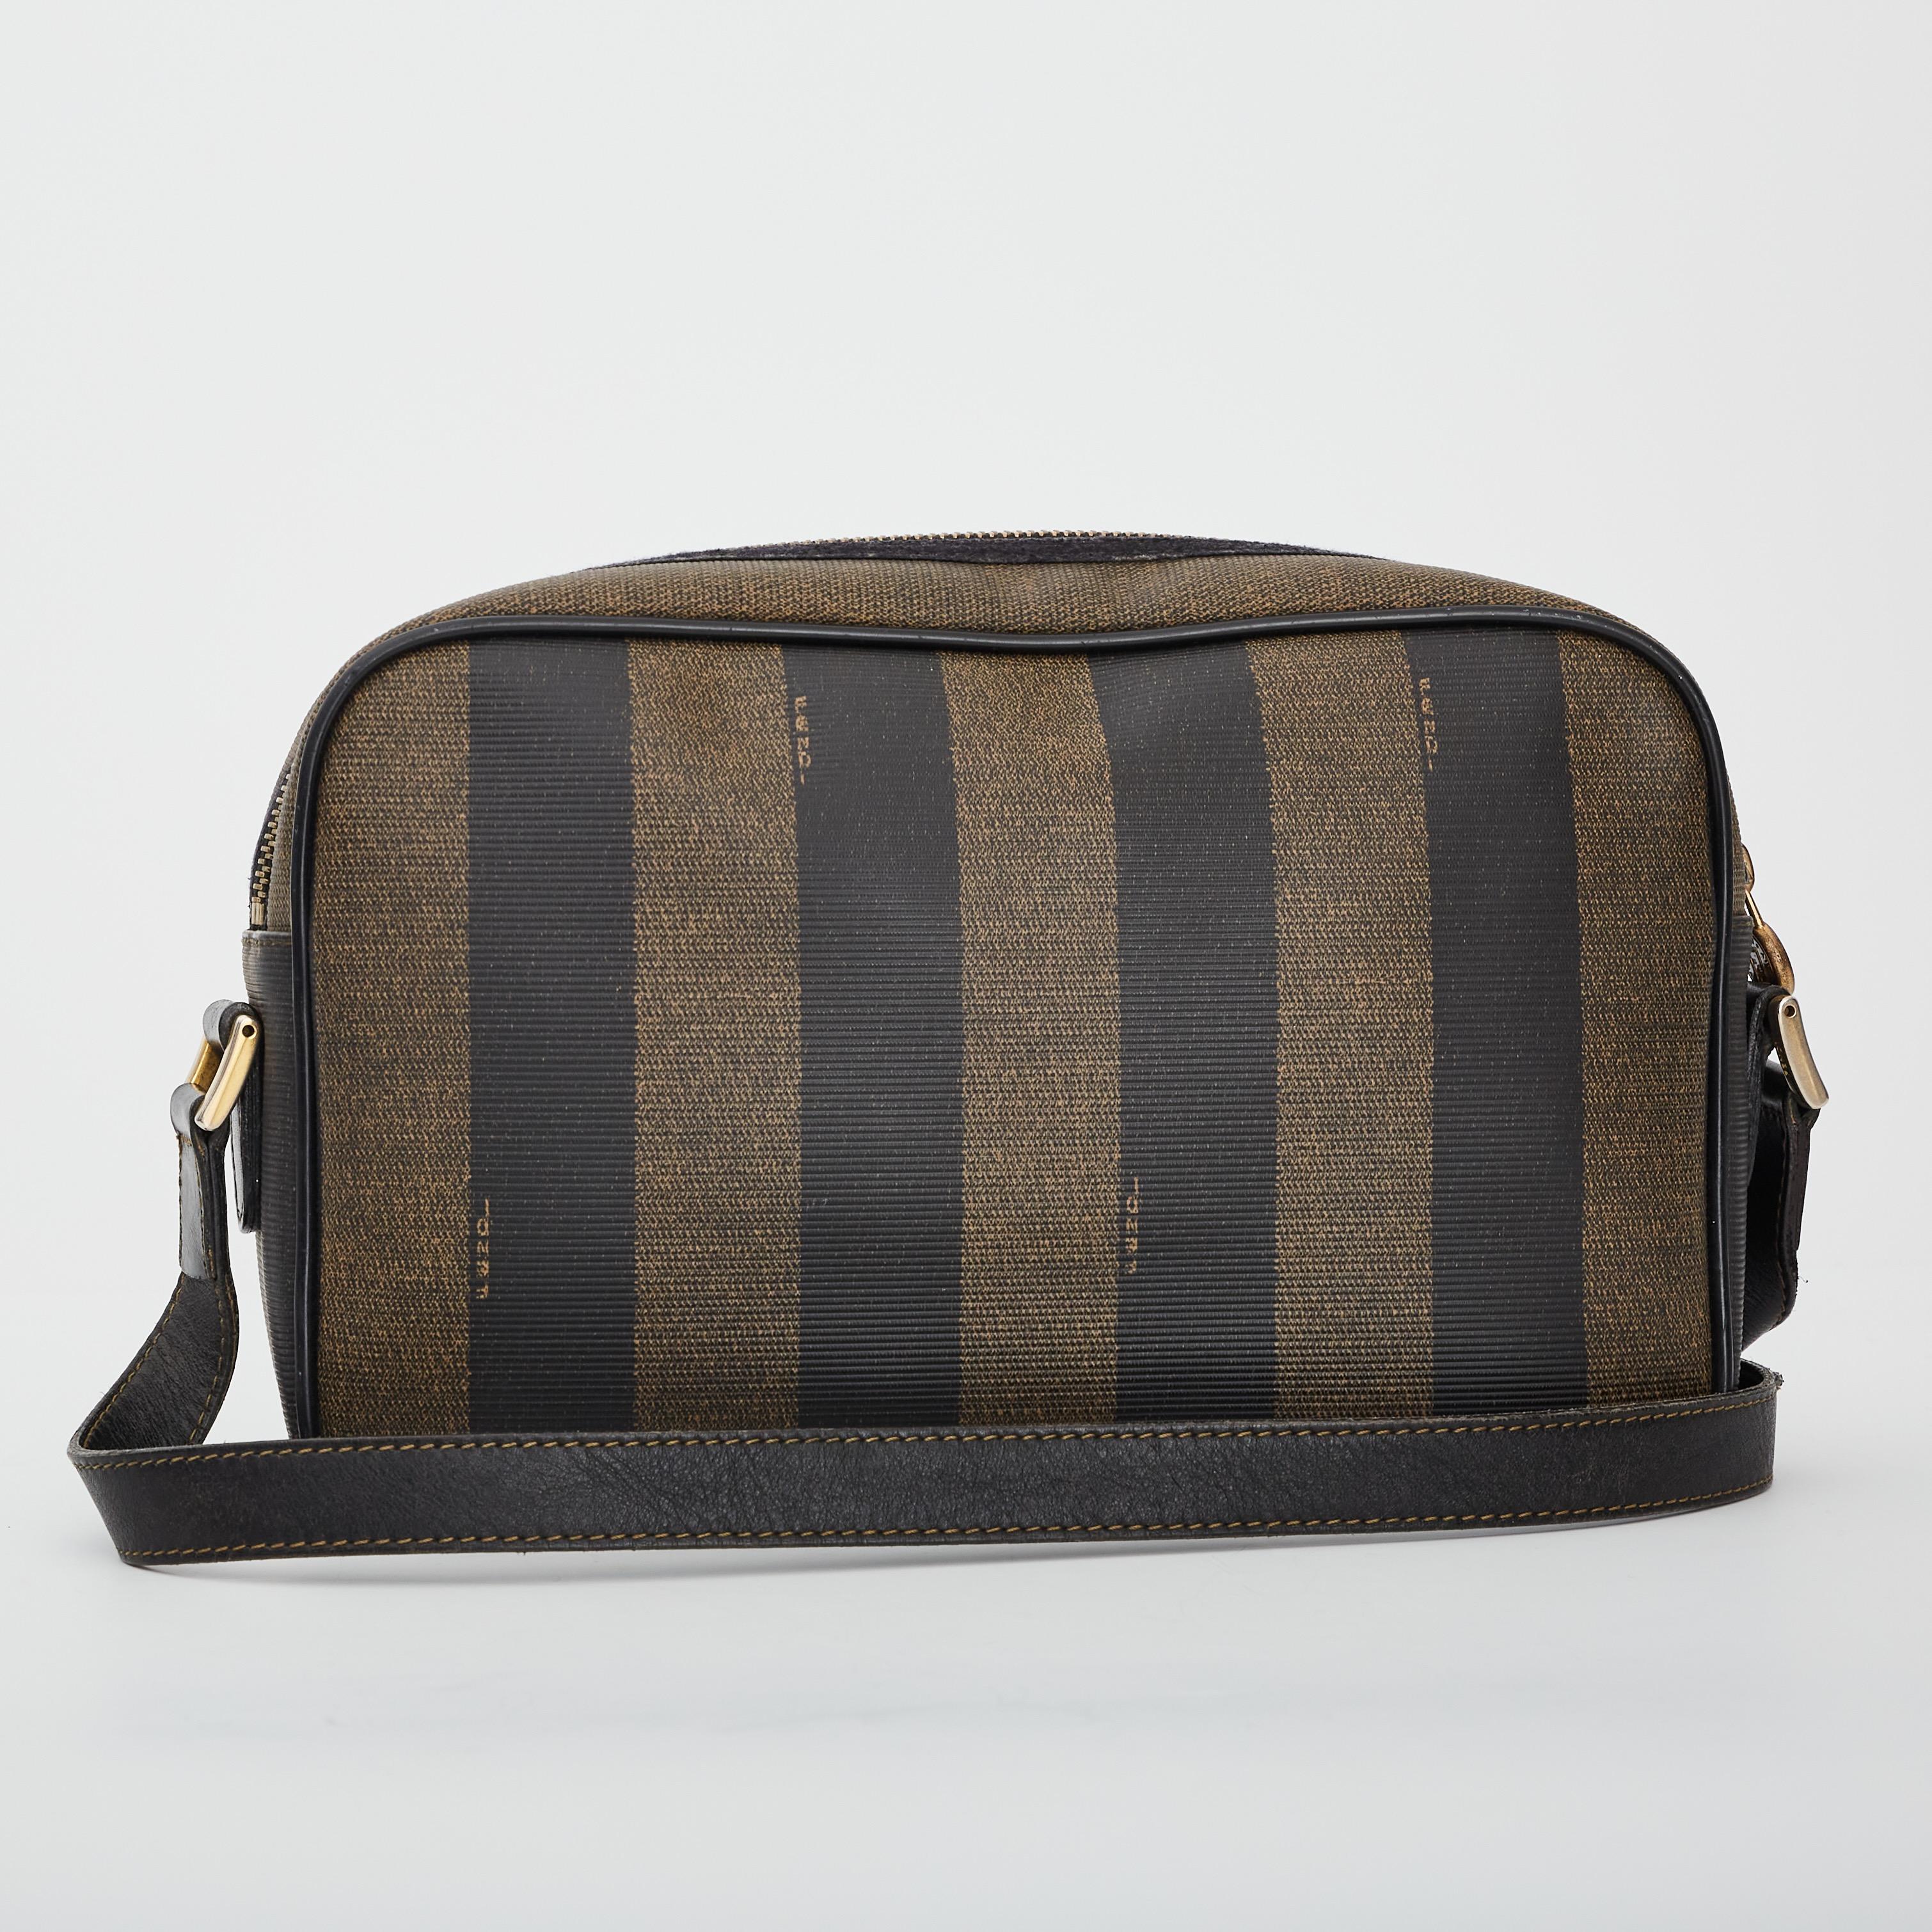 This vintage Fendi Pequin striped camera bag is made of brown and black coated canvas with an adjustable shoulder strap made of genuine black leather. This bag features an external pocket with the embossed Fendi logo on the front, which is also